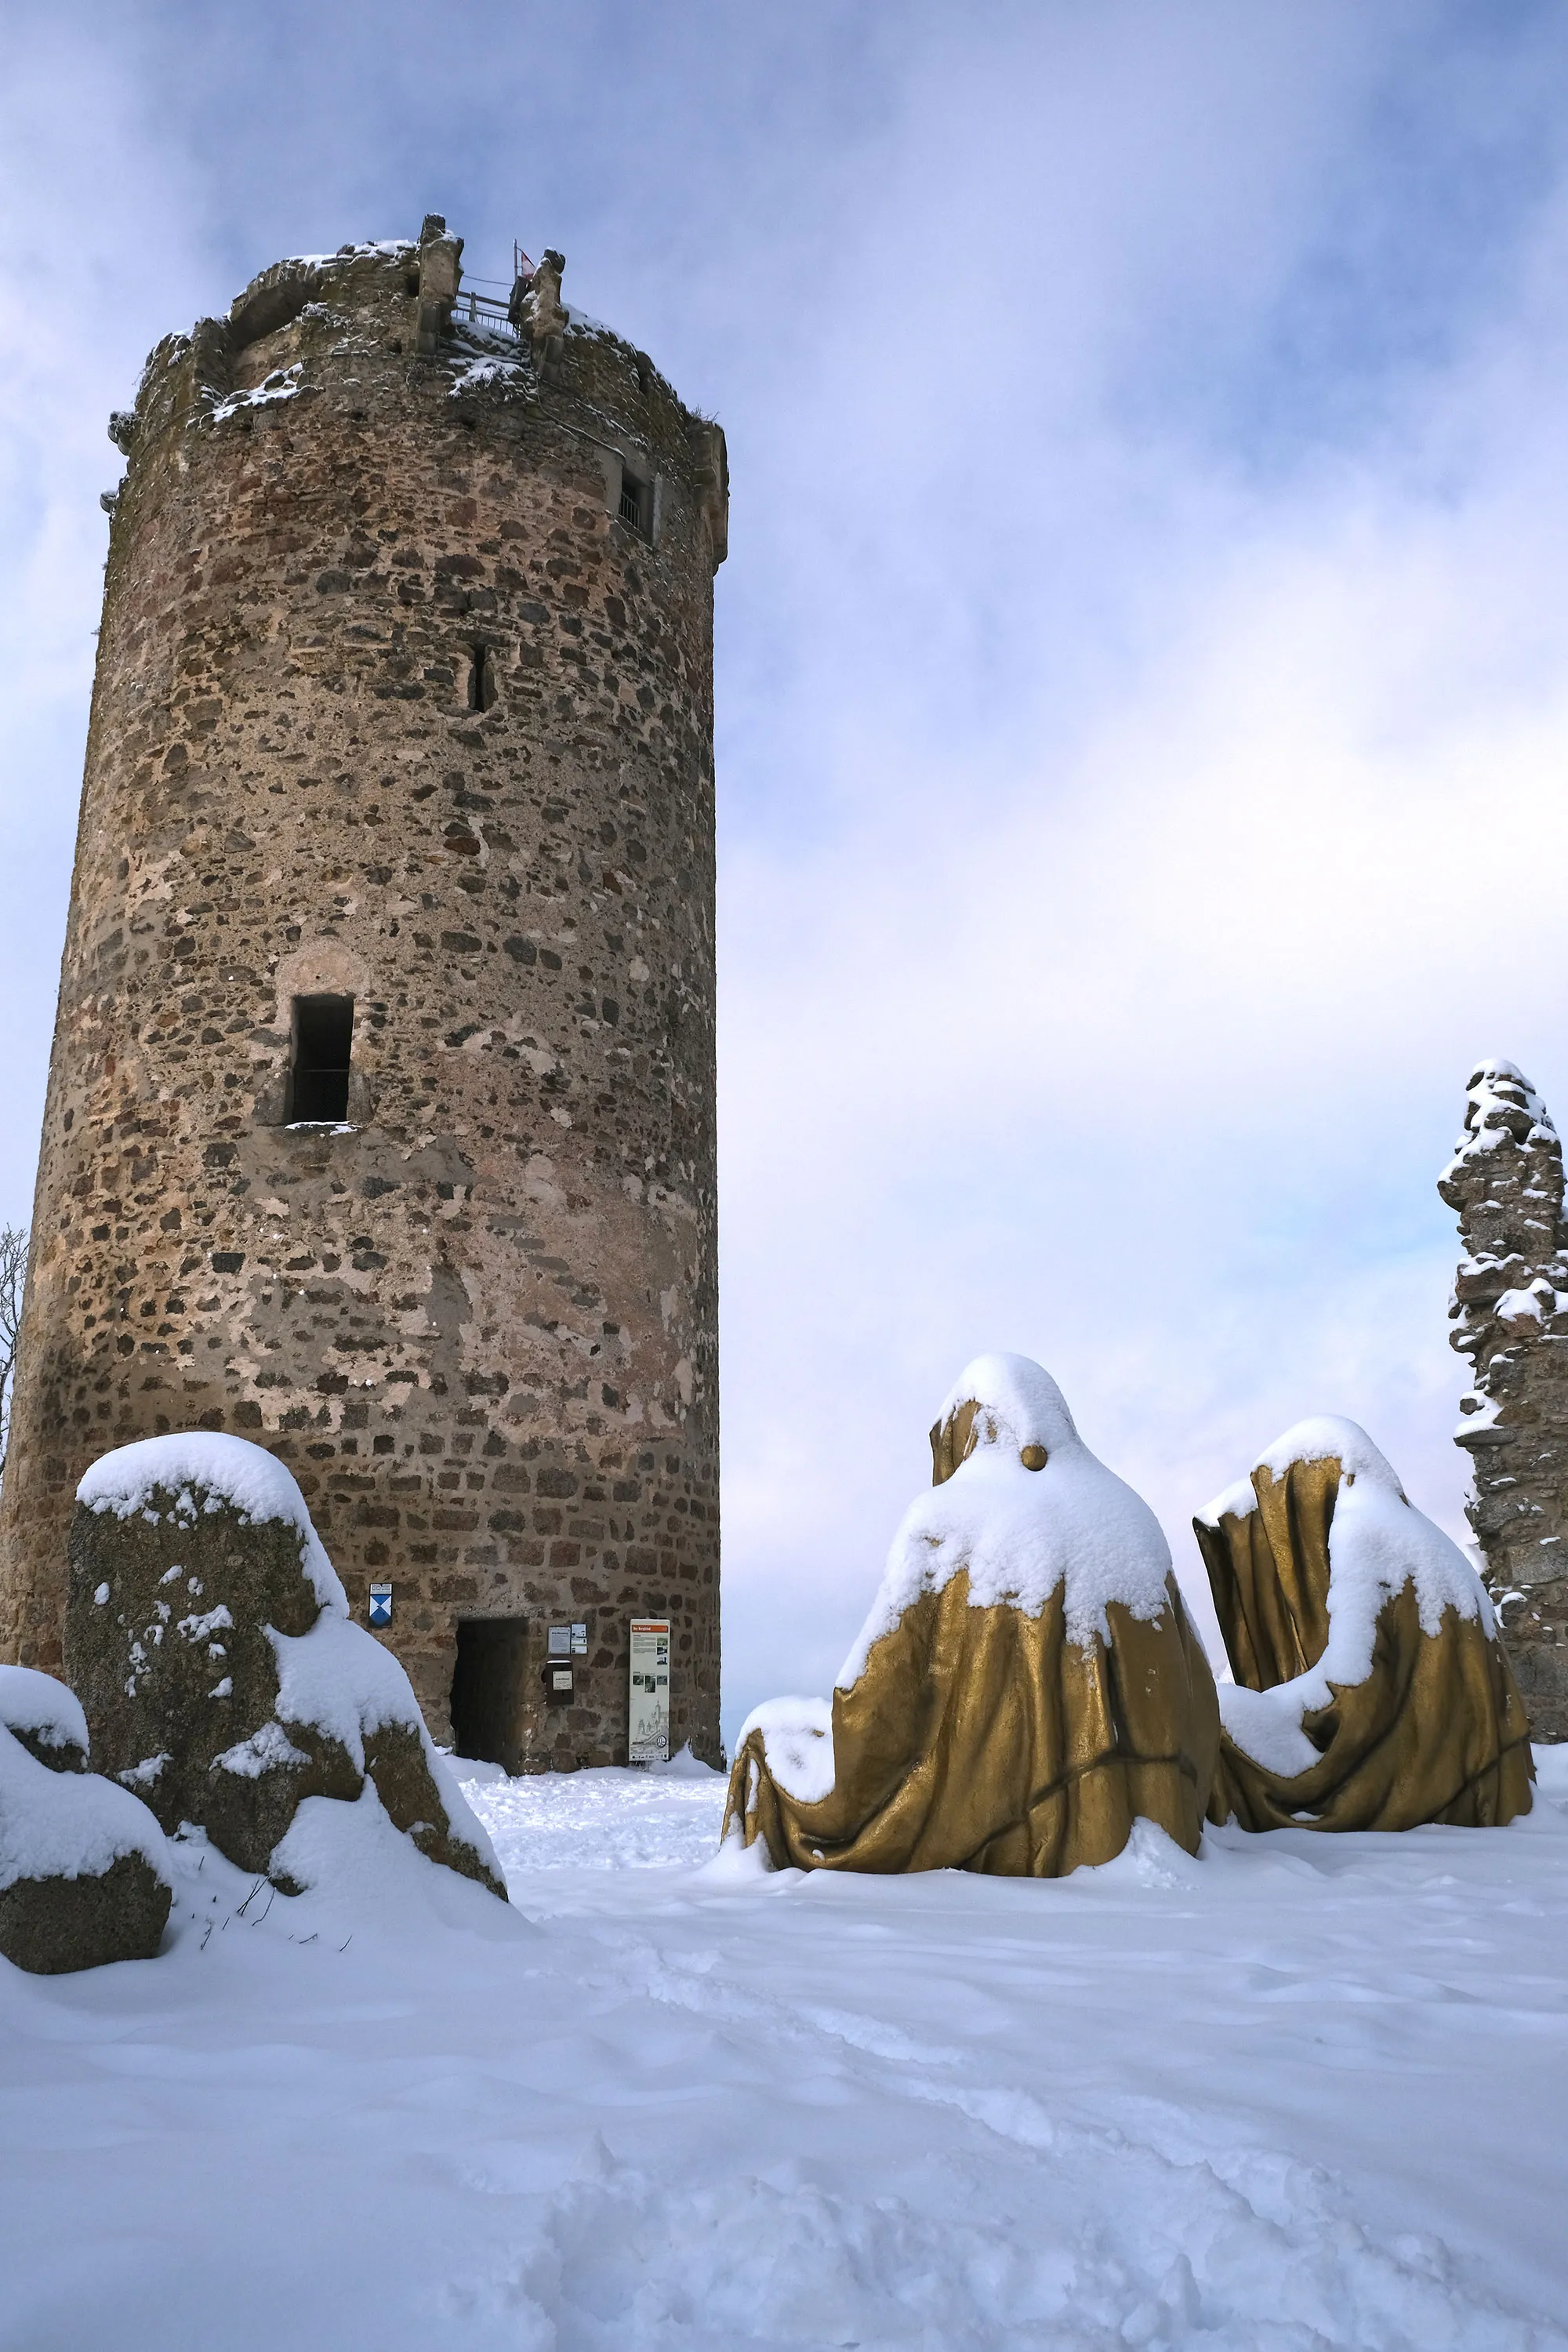 Photo showing: Castle Ruin Waxenberg   GUARDIANS OF TIME by Manfred Kielnhofer GUARDIANS OF NATURE  GUARDIANS OF SUSTAINABILITY  GUARDIANS OF RIGHTS  The world needs more "guardians of time" than ever